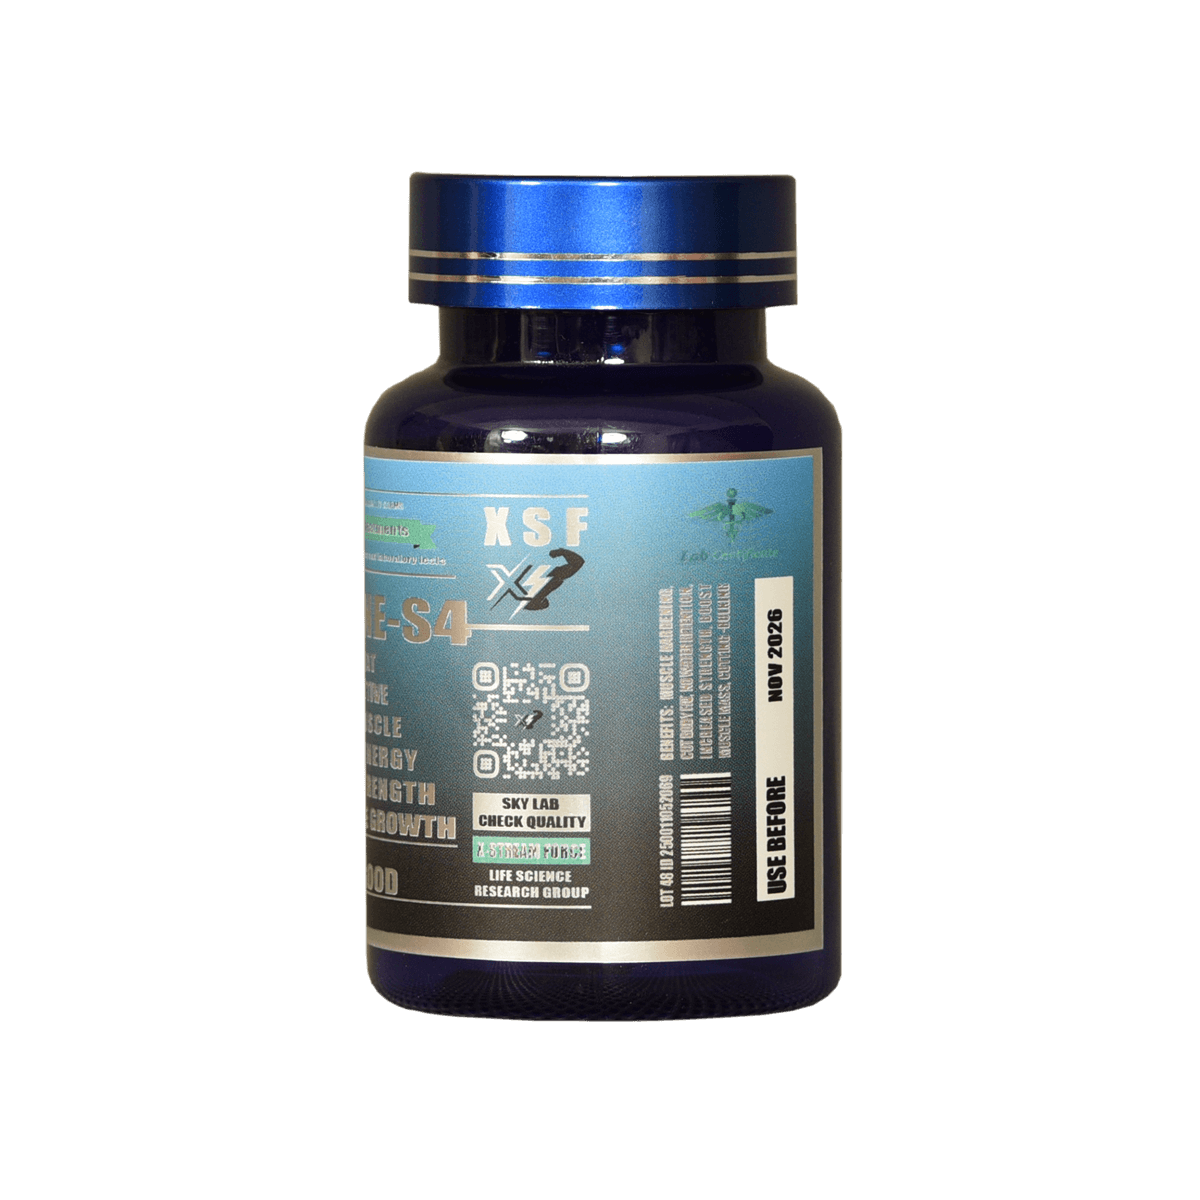 andarine-s4-capsules-100-15mg-muscle shop-xstreamforce-for cardio-strength-fat cleaner-hard and dry✦s4sarms✦ fitness supplements-muscle-hunter